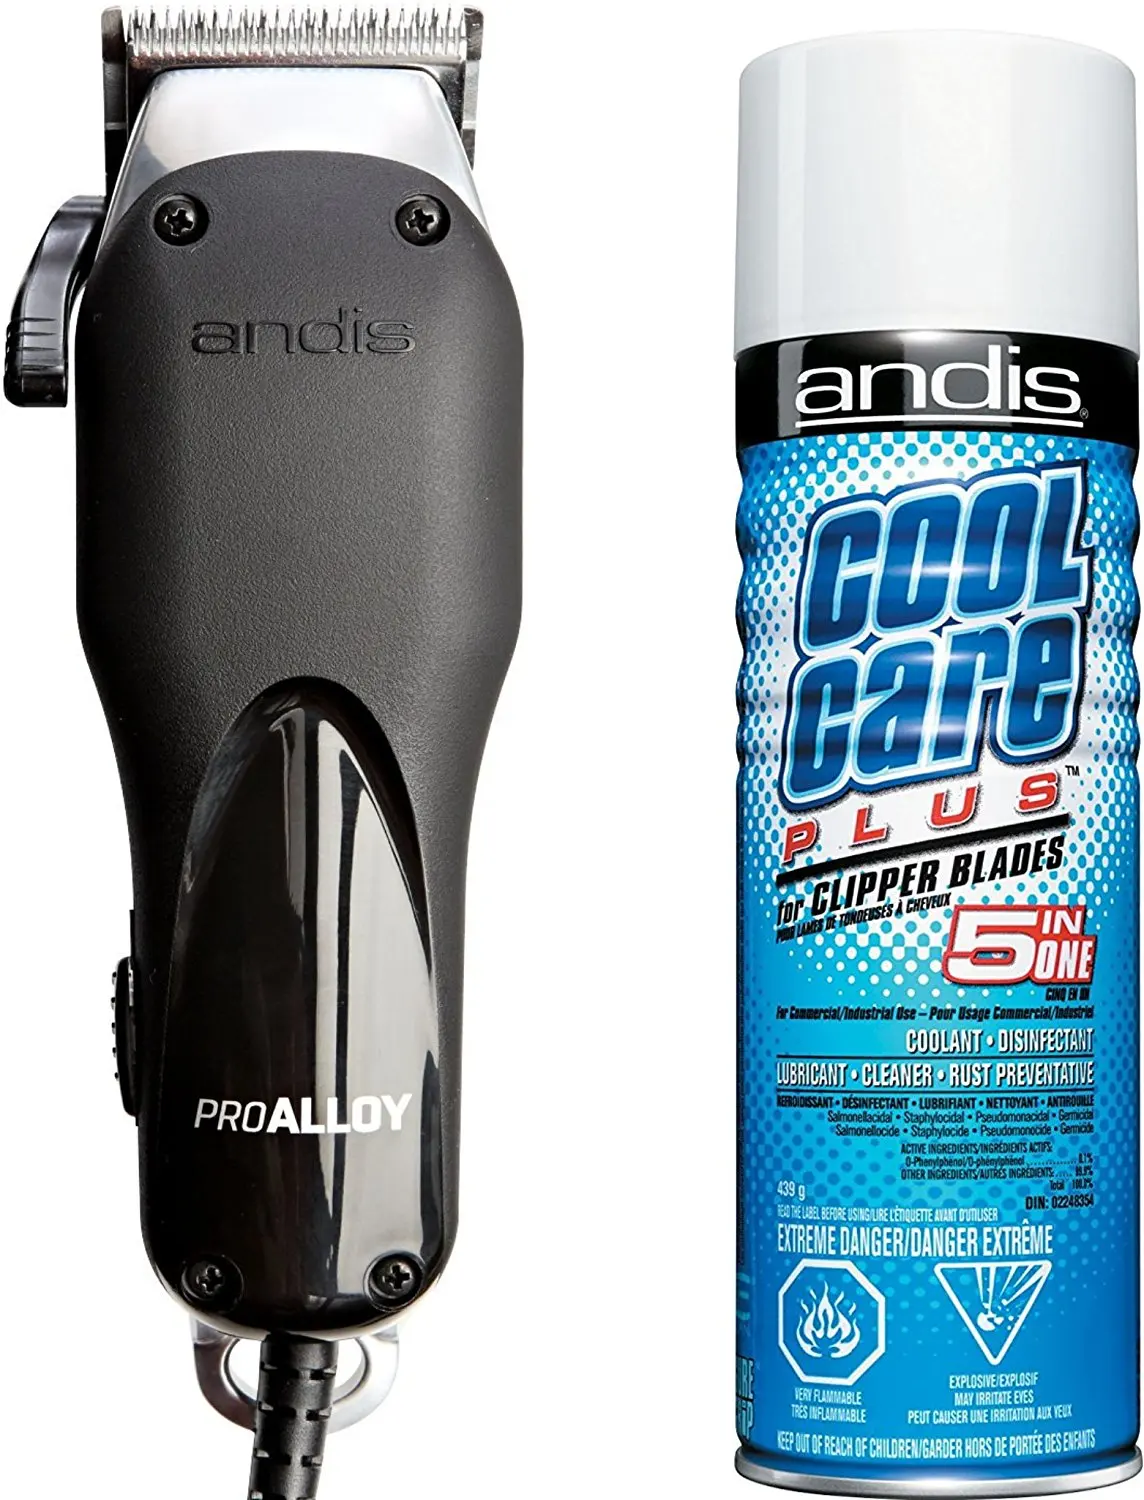 andis professional hair clippers